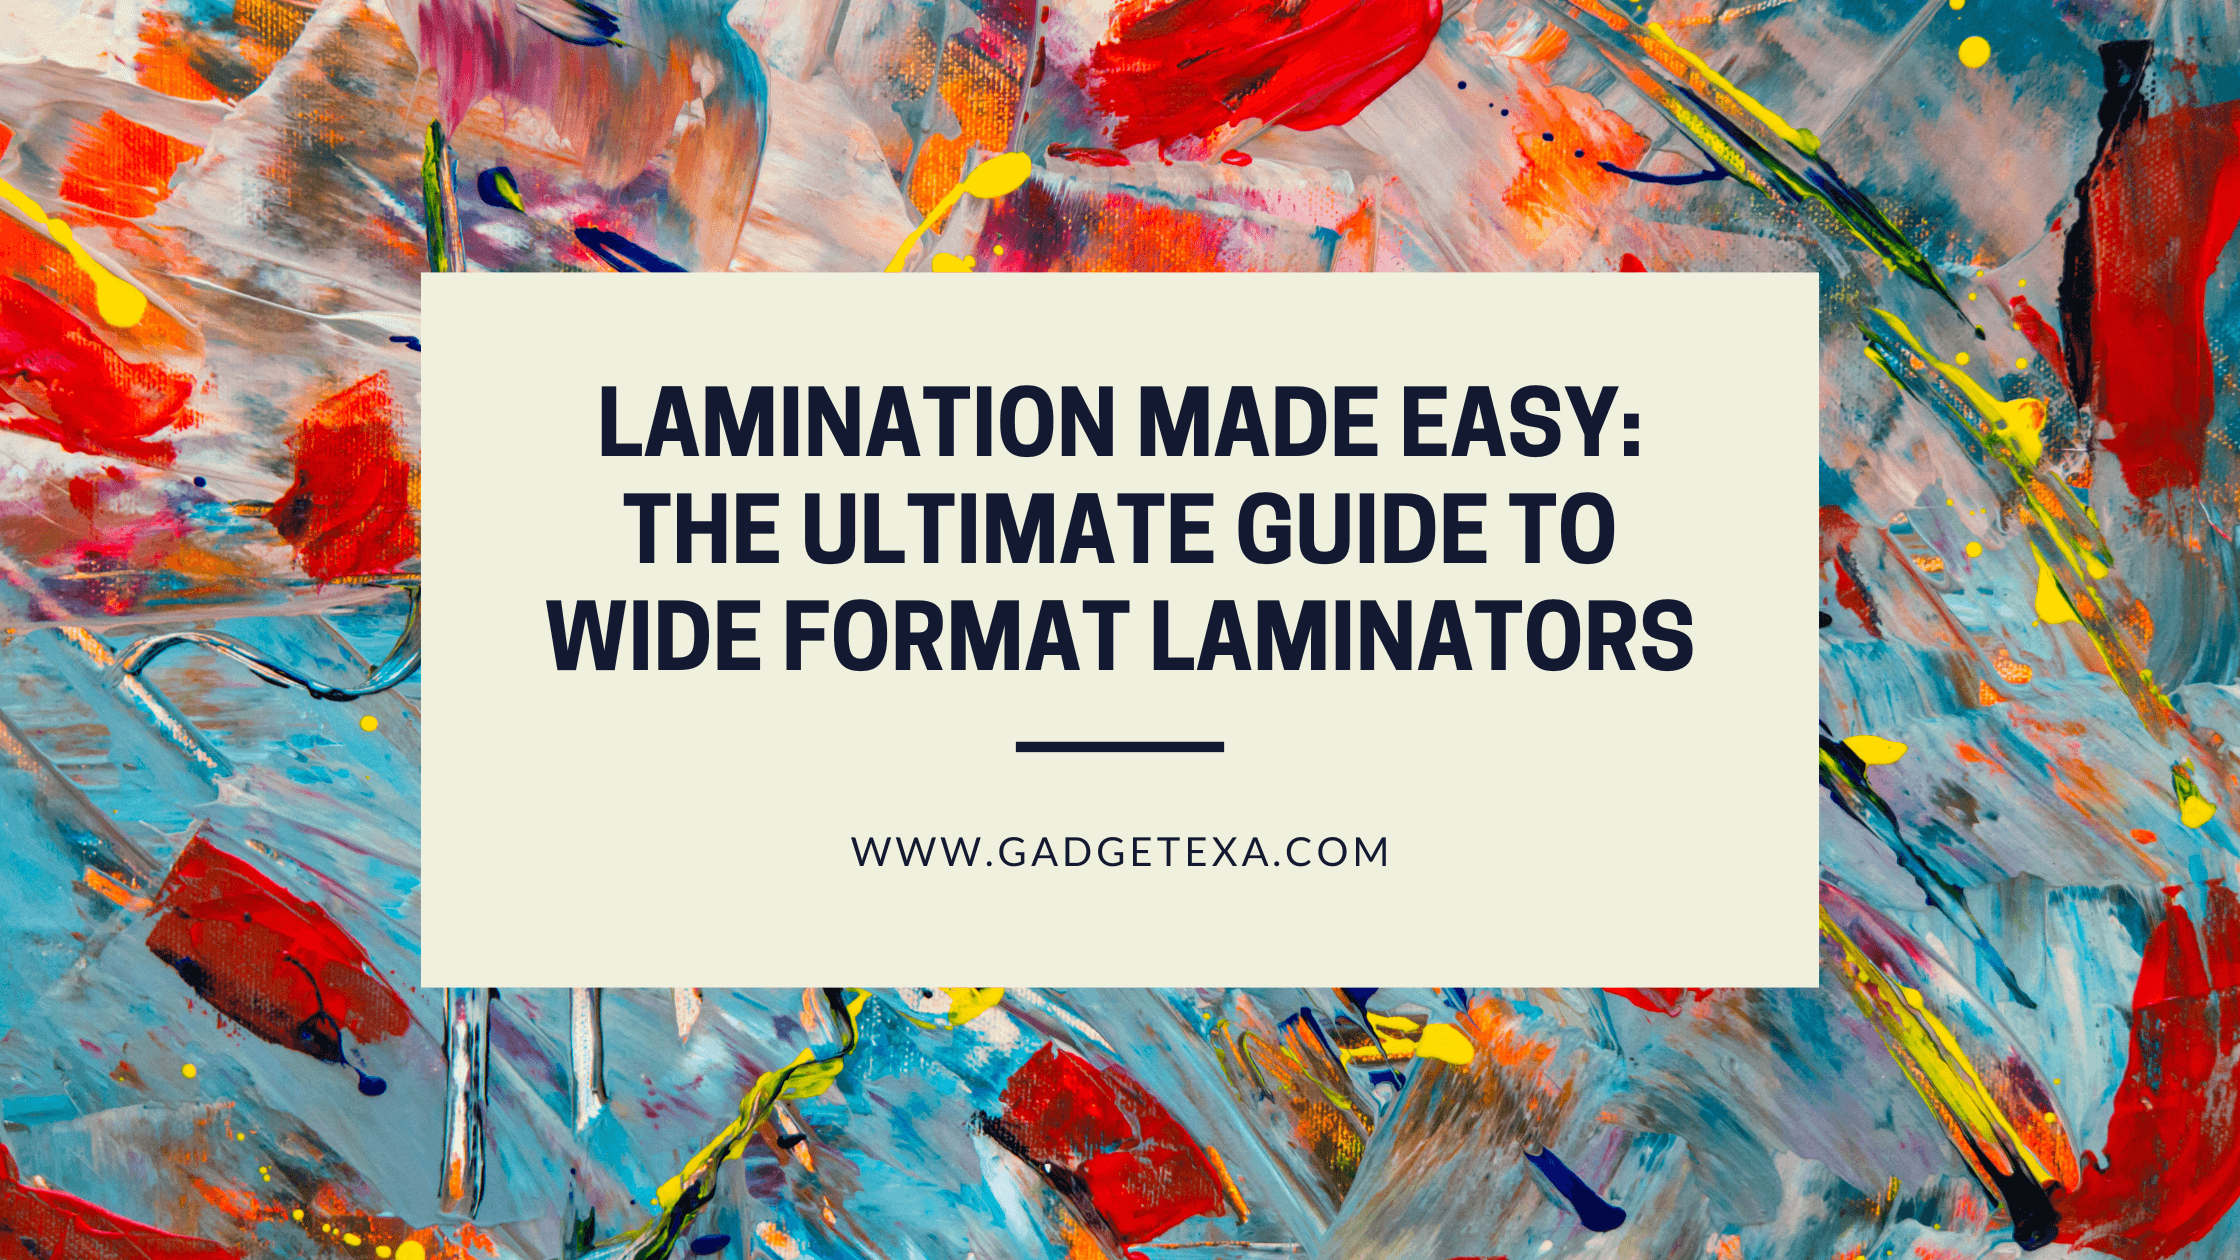 You are currently viewing Lamination Made Easy: The Ultimate Guide to Wide Format Laminators